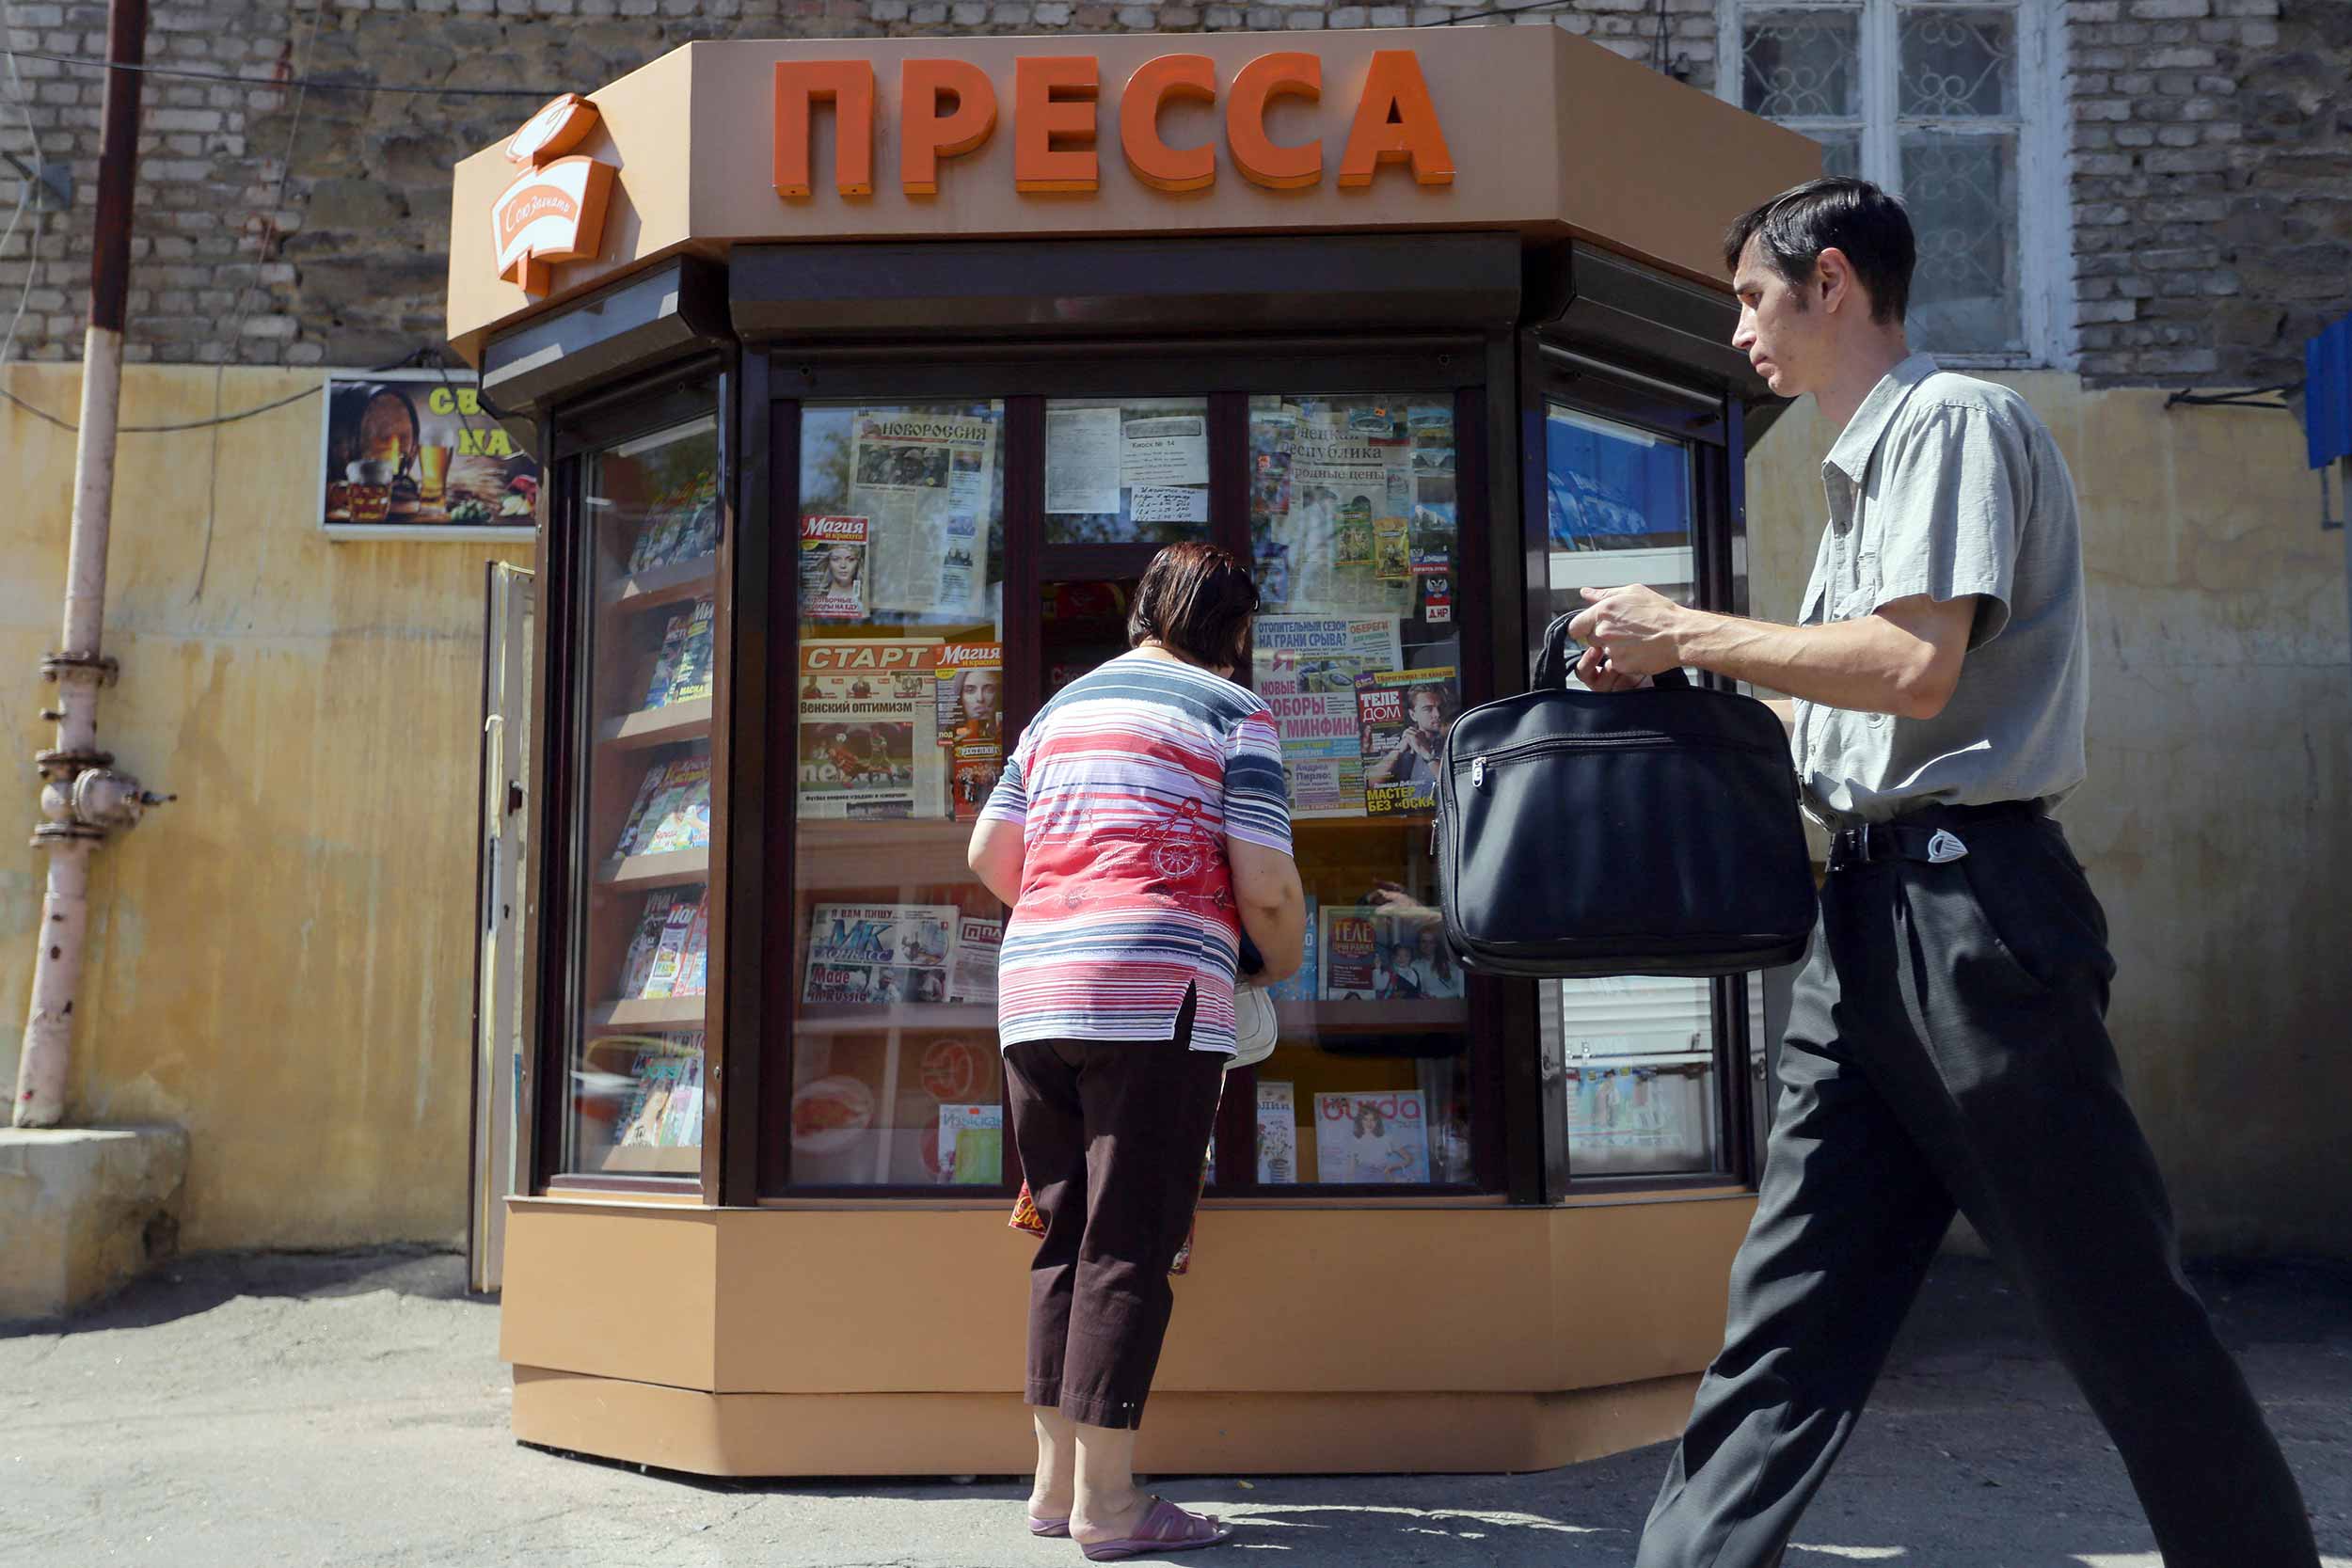 A man walks past a woman buying a magazine from a newspaper stand in Donetsk. Yana Agafonova, a media official in the pro-Russian rebel government in eastern Ukraine, says critical publications are not welcome in the separatist region, which is locked in a vicious propaganda war with Kiev. © OLEKSII FILIPPOV/AFP via Getty Images